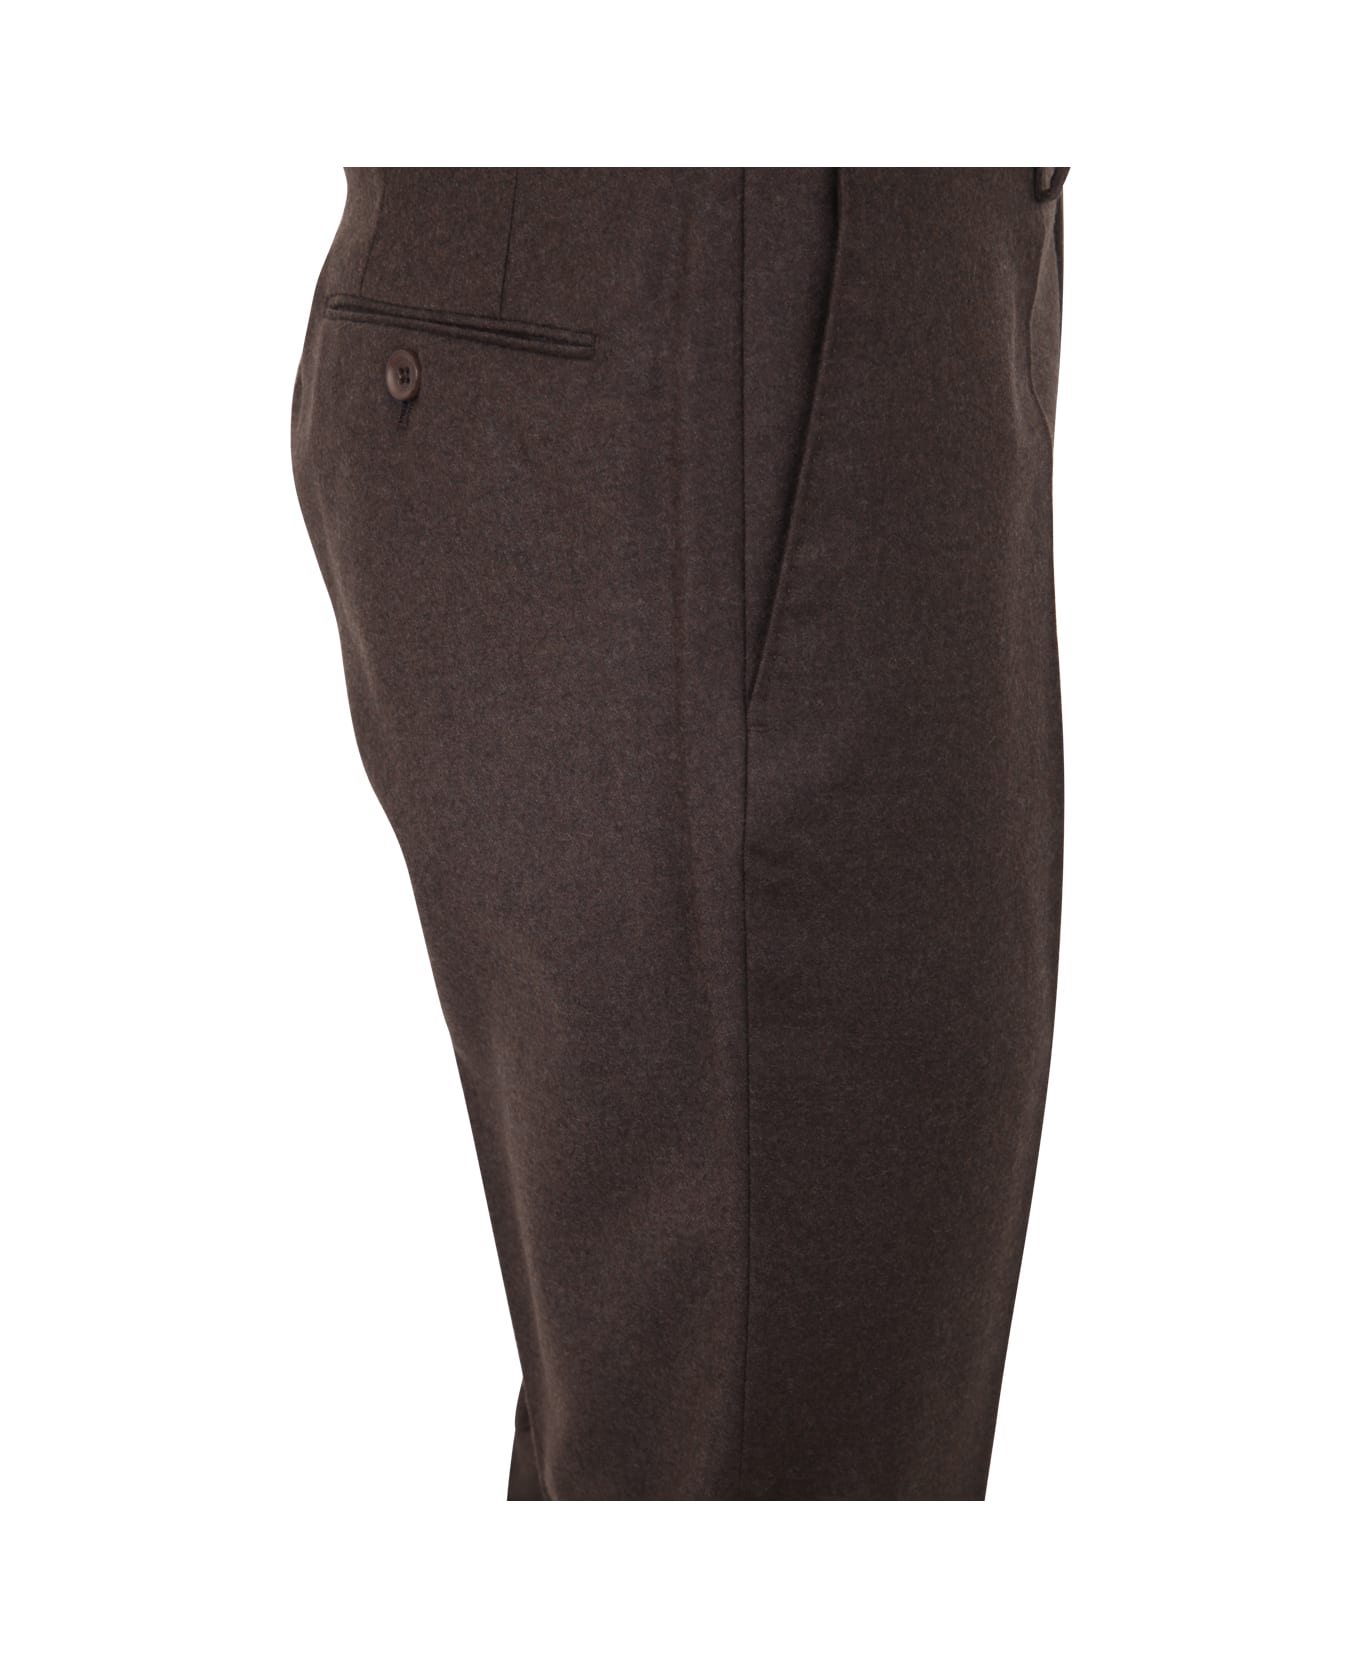 Incotex Flannel Classic Trousers - Chestnut